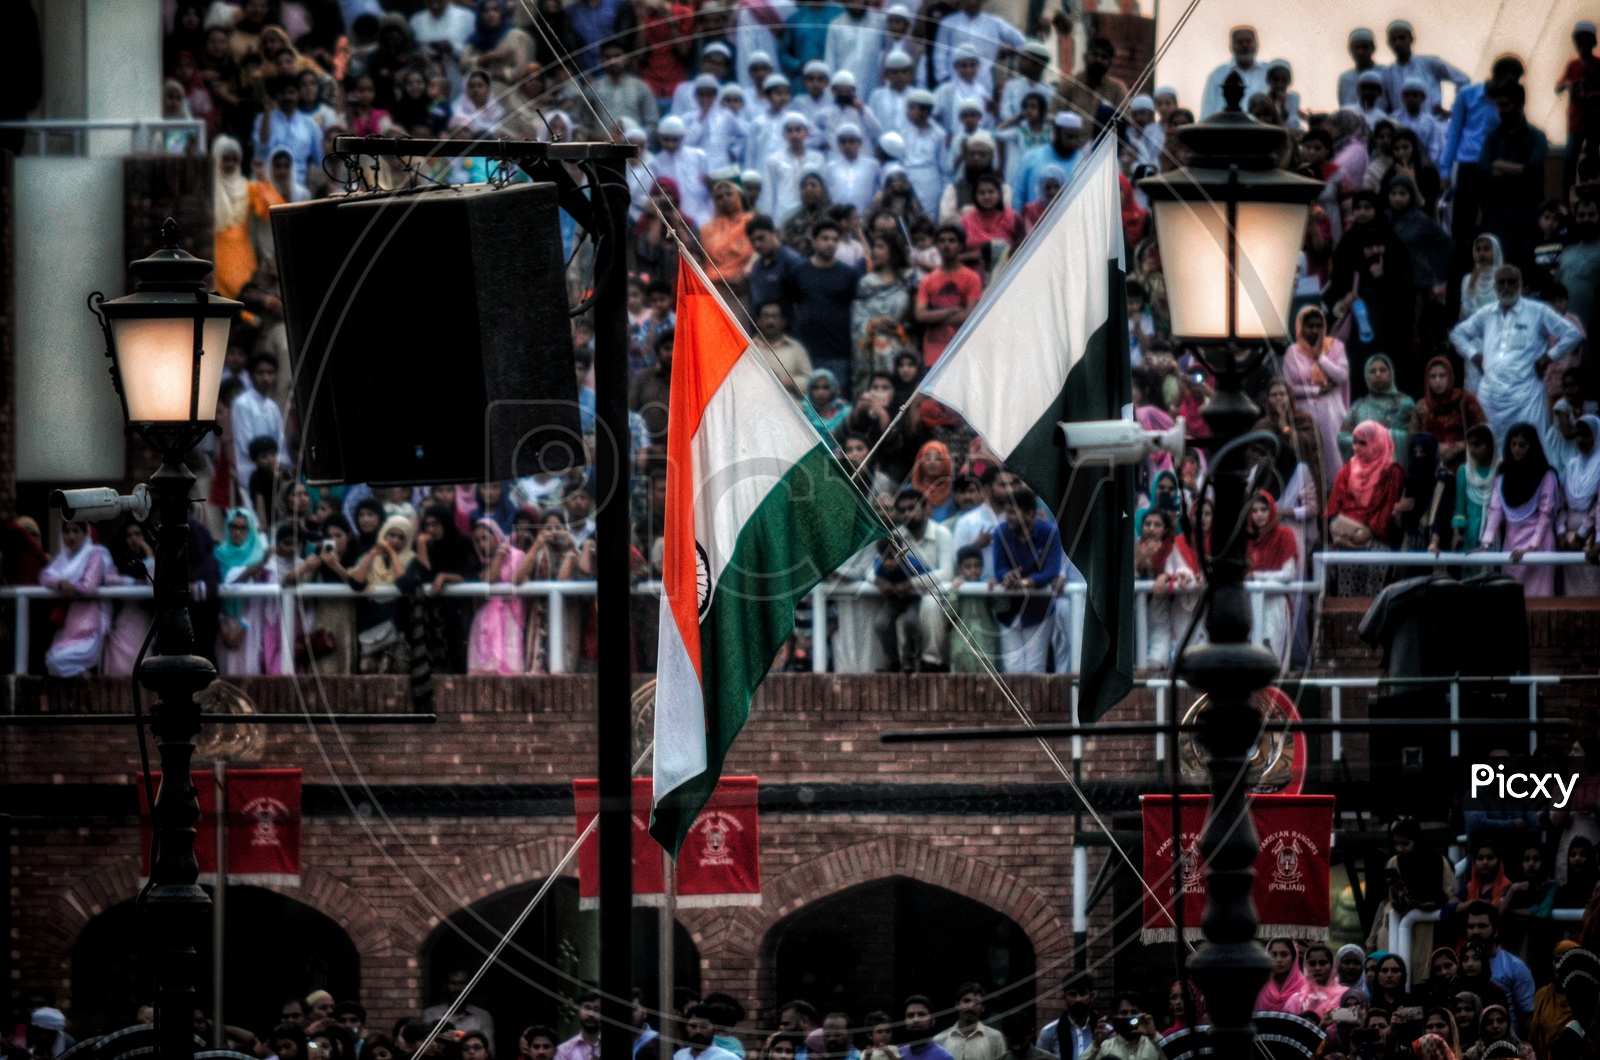 Wagah border ceremony ! When both the countries flag are summoned together so that no one will attack each other once the flag is put down until morning.